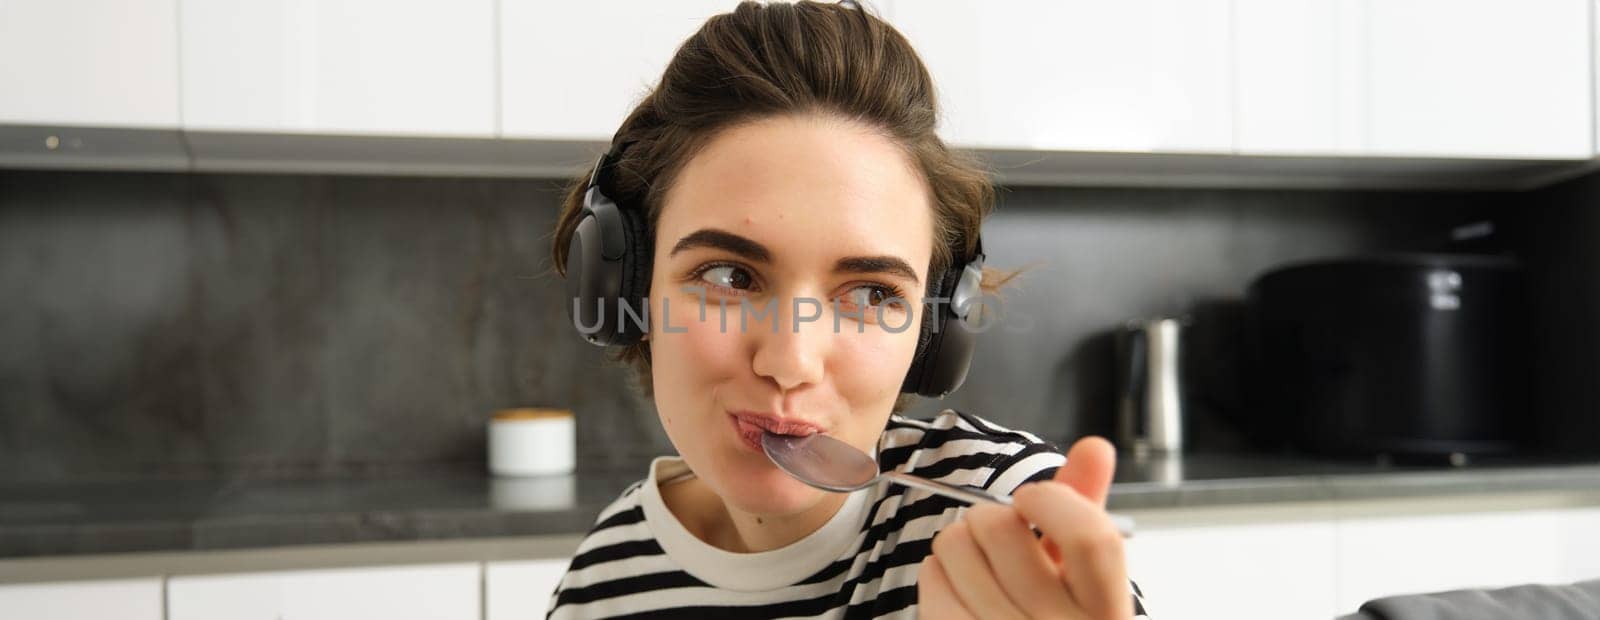 Close up portrait of young smiling woman in headphones, eating cereals with spoon and listening music, wearing earphones, sitting in the kitchen.